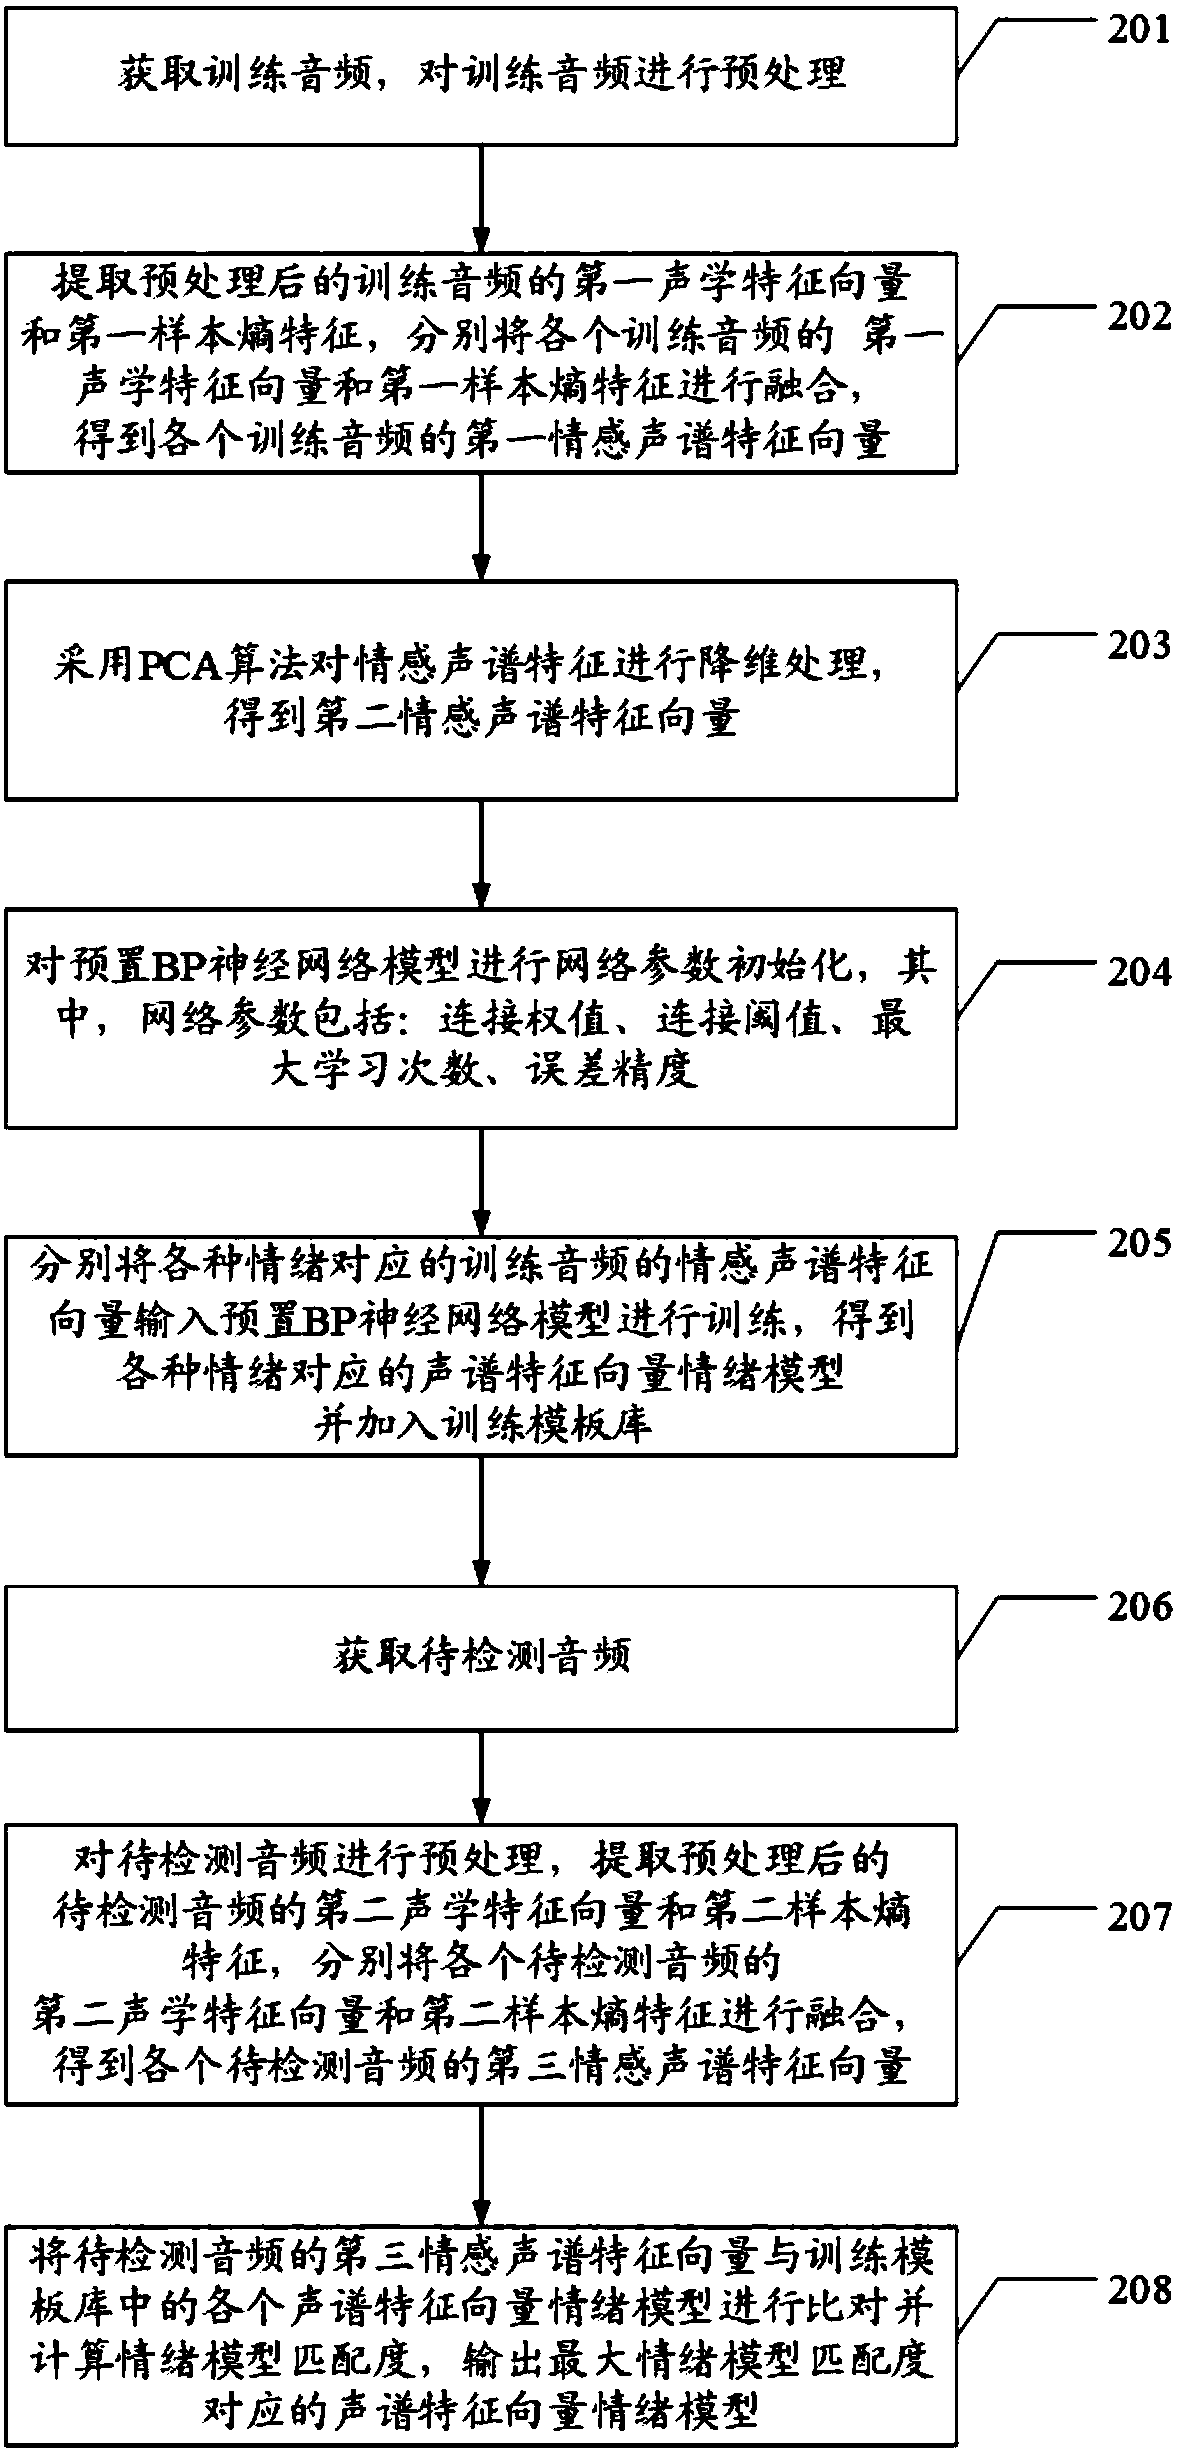 PCA-BP-based emotion recognition method and system